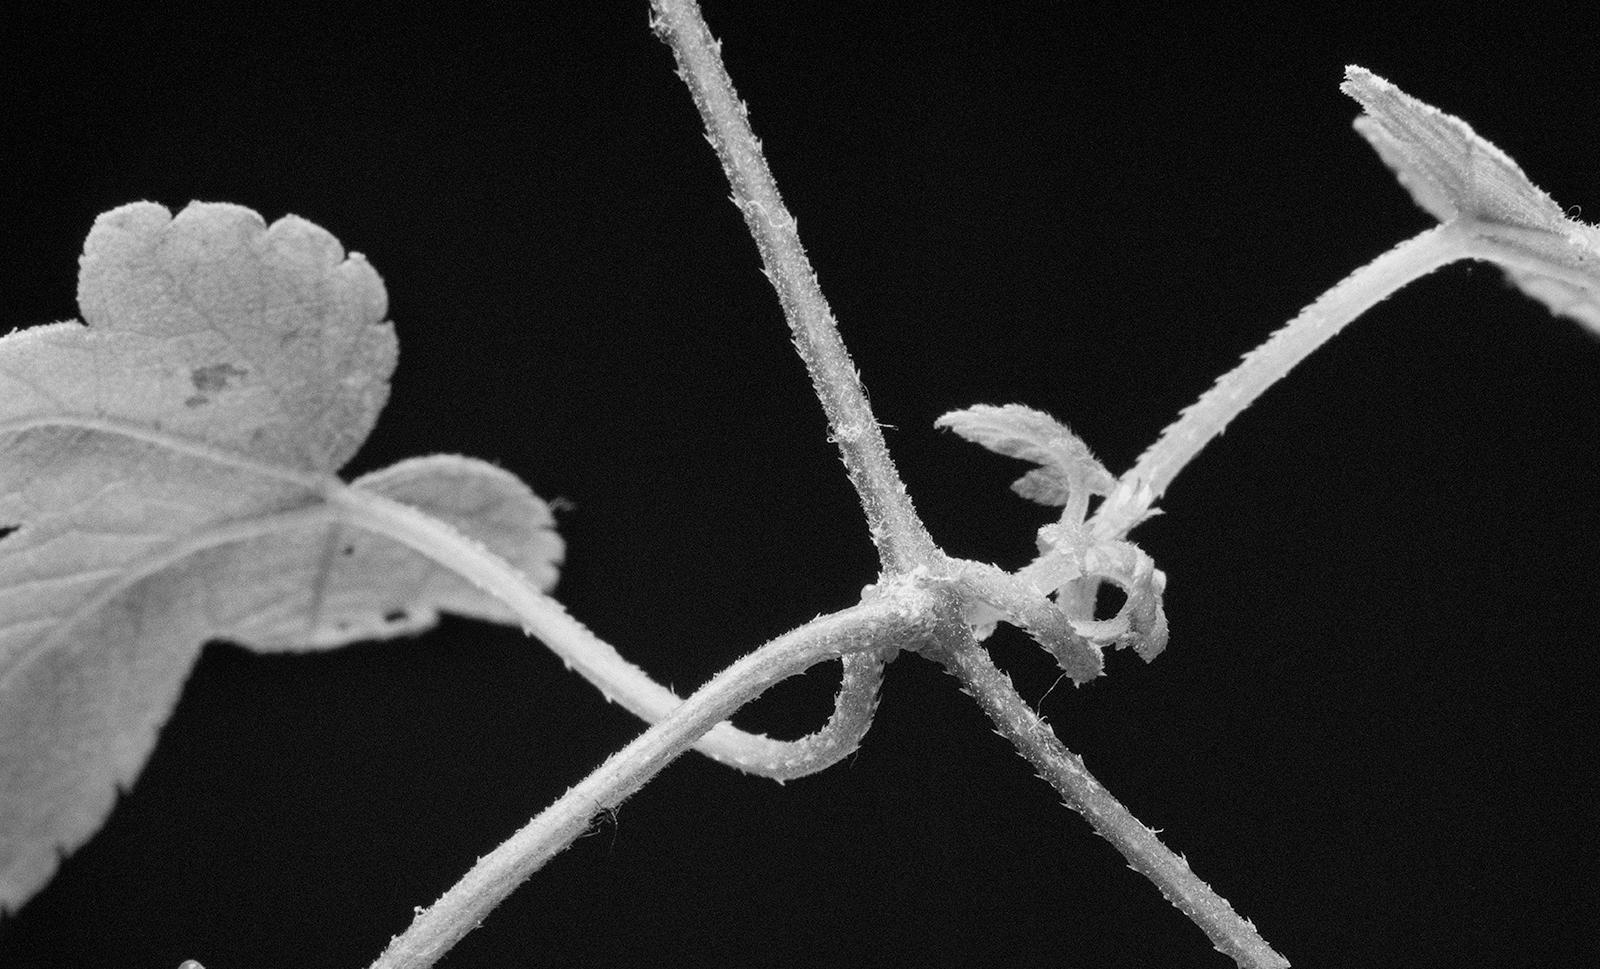 A black and white close up photograph of a wild hop plant against a black background.